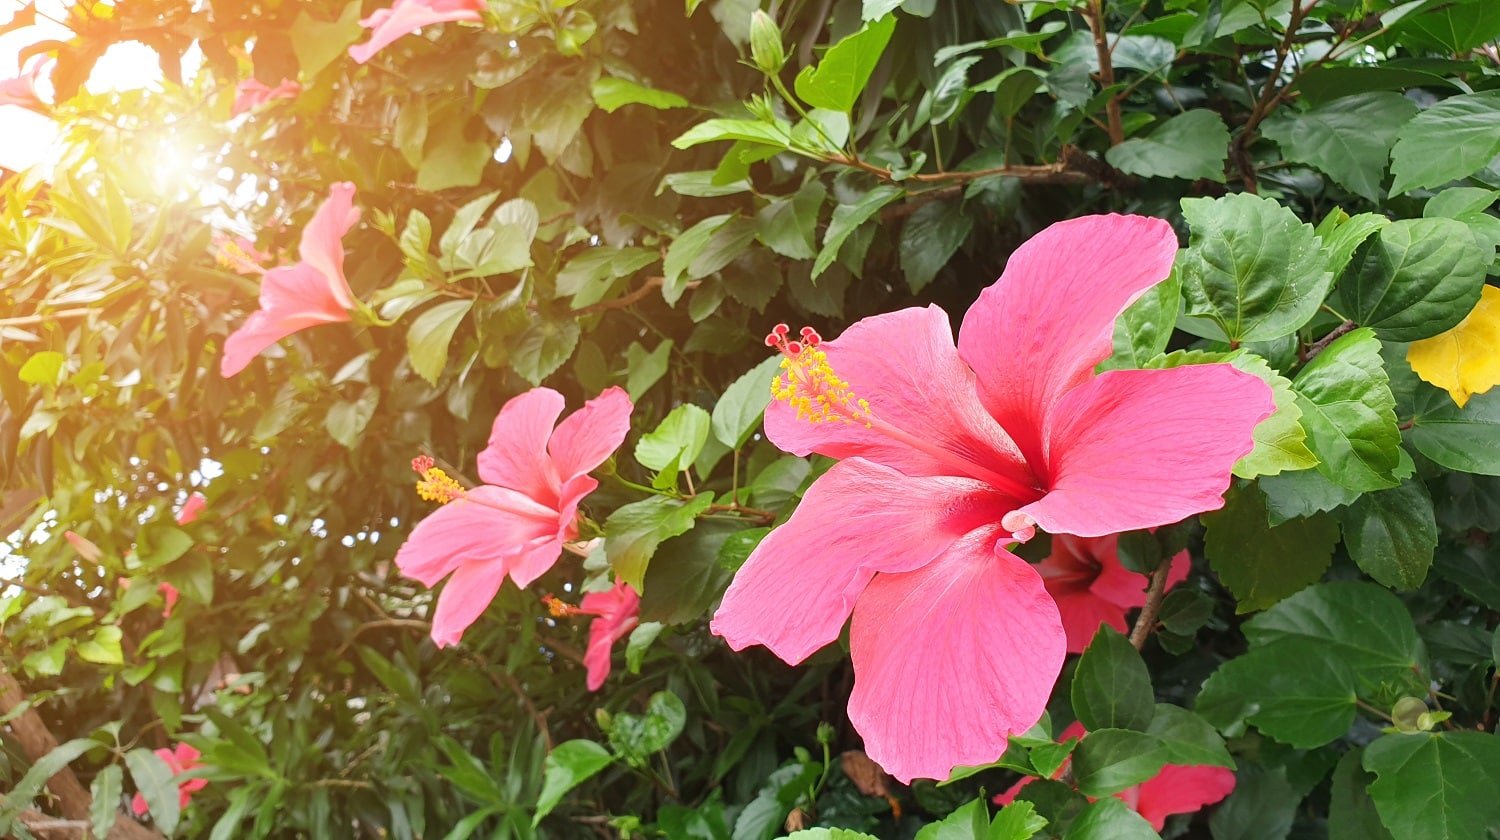 red hibiscus flower and green leaf in natural garden